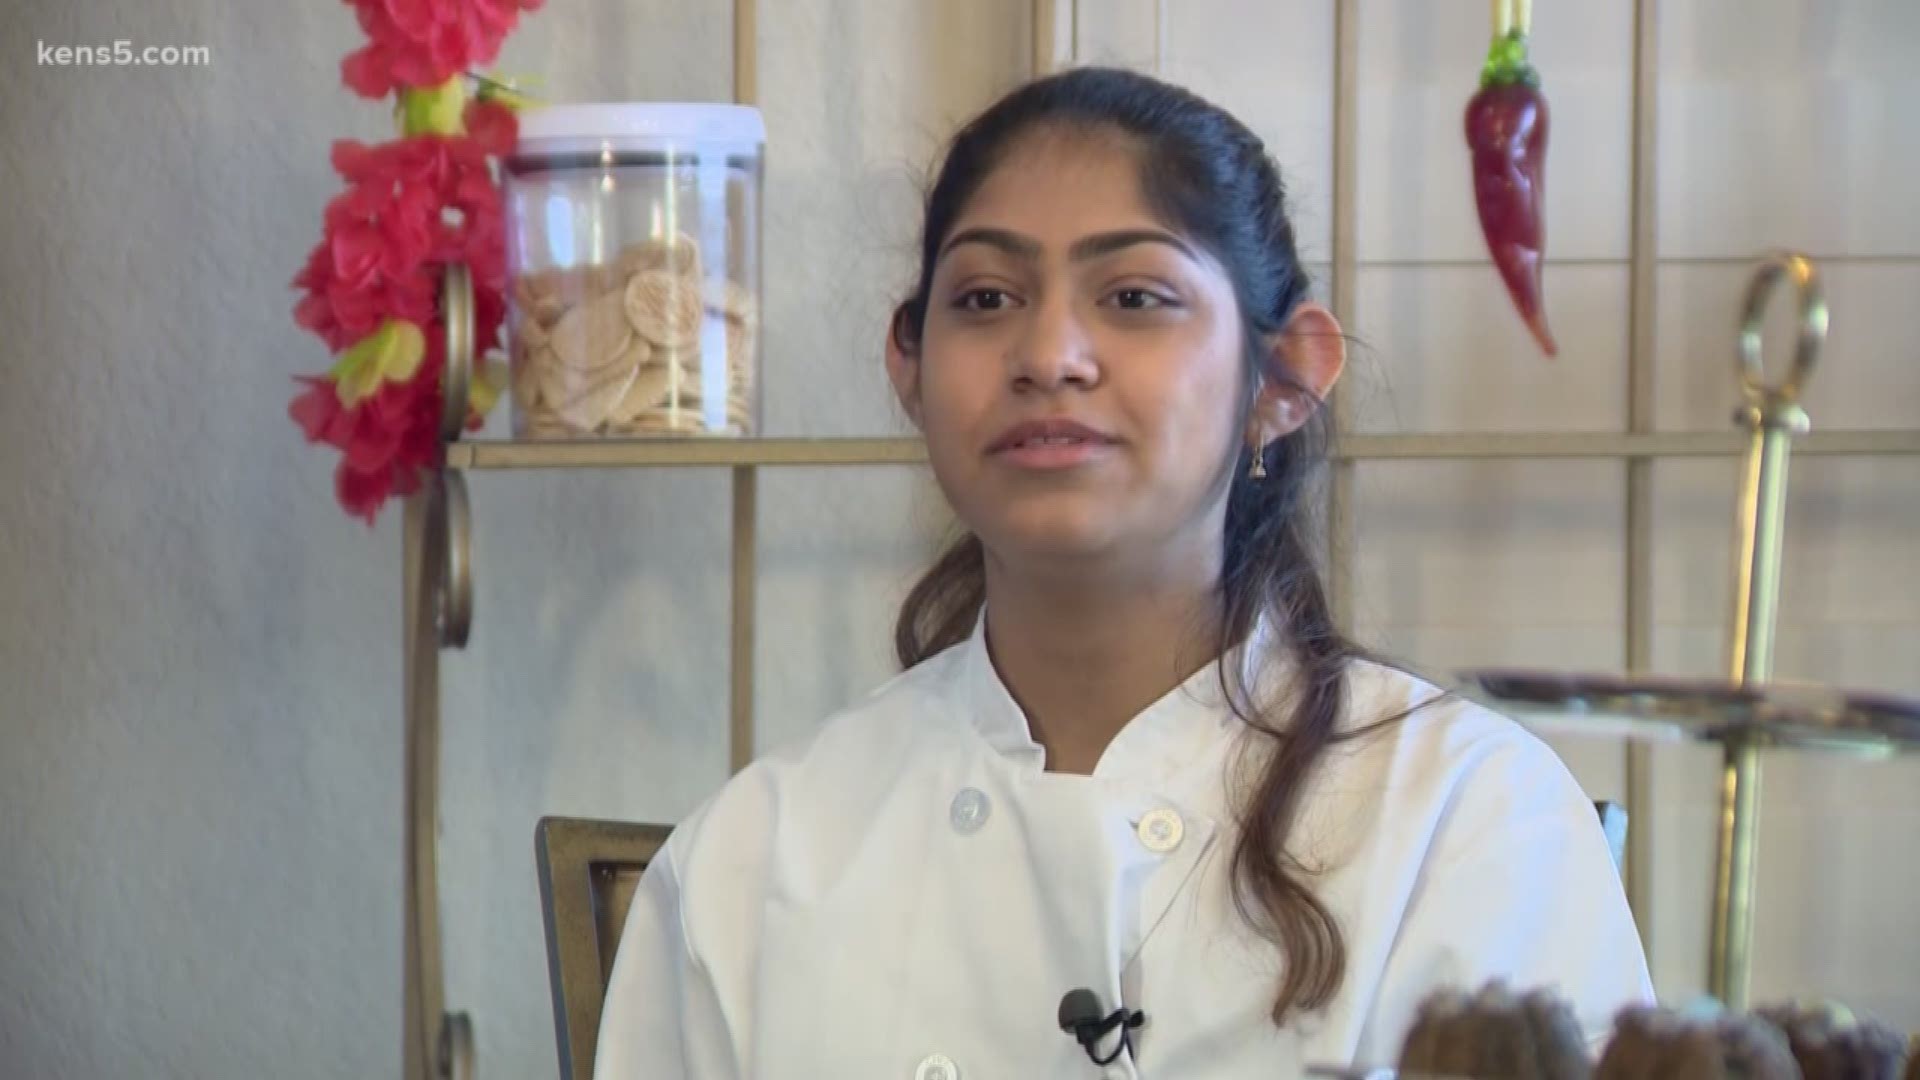 A health-focused bakery that splits the profits with children's charities in the city; this teenager is truly a kid who makes San Antonio great!